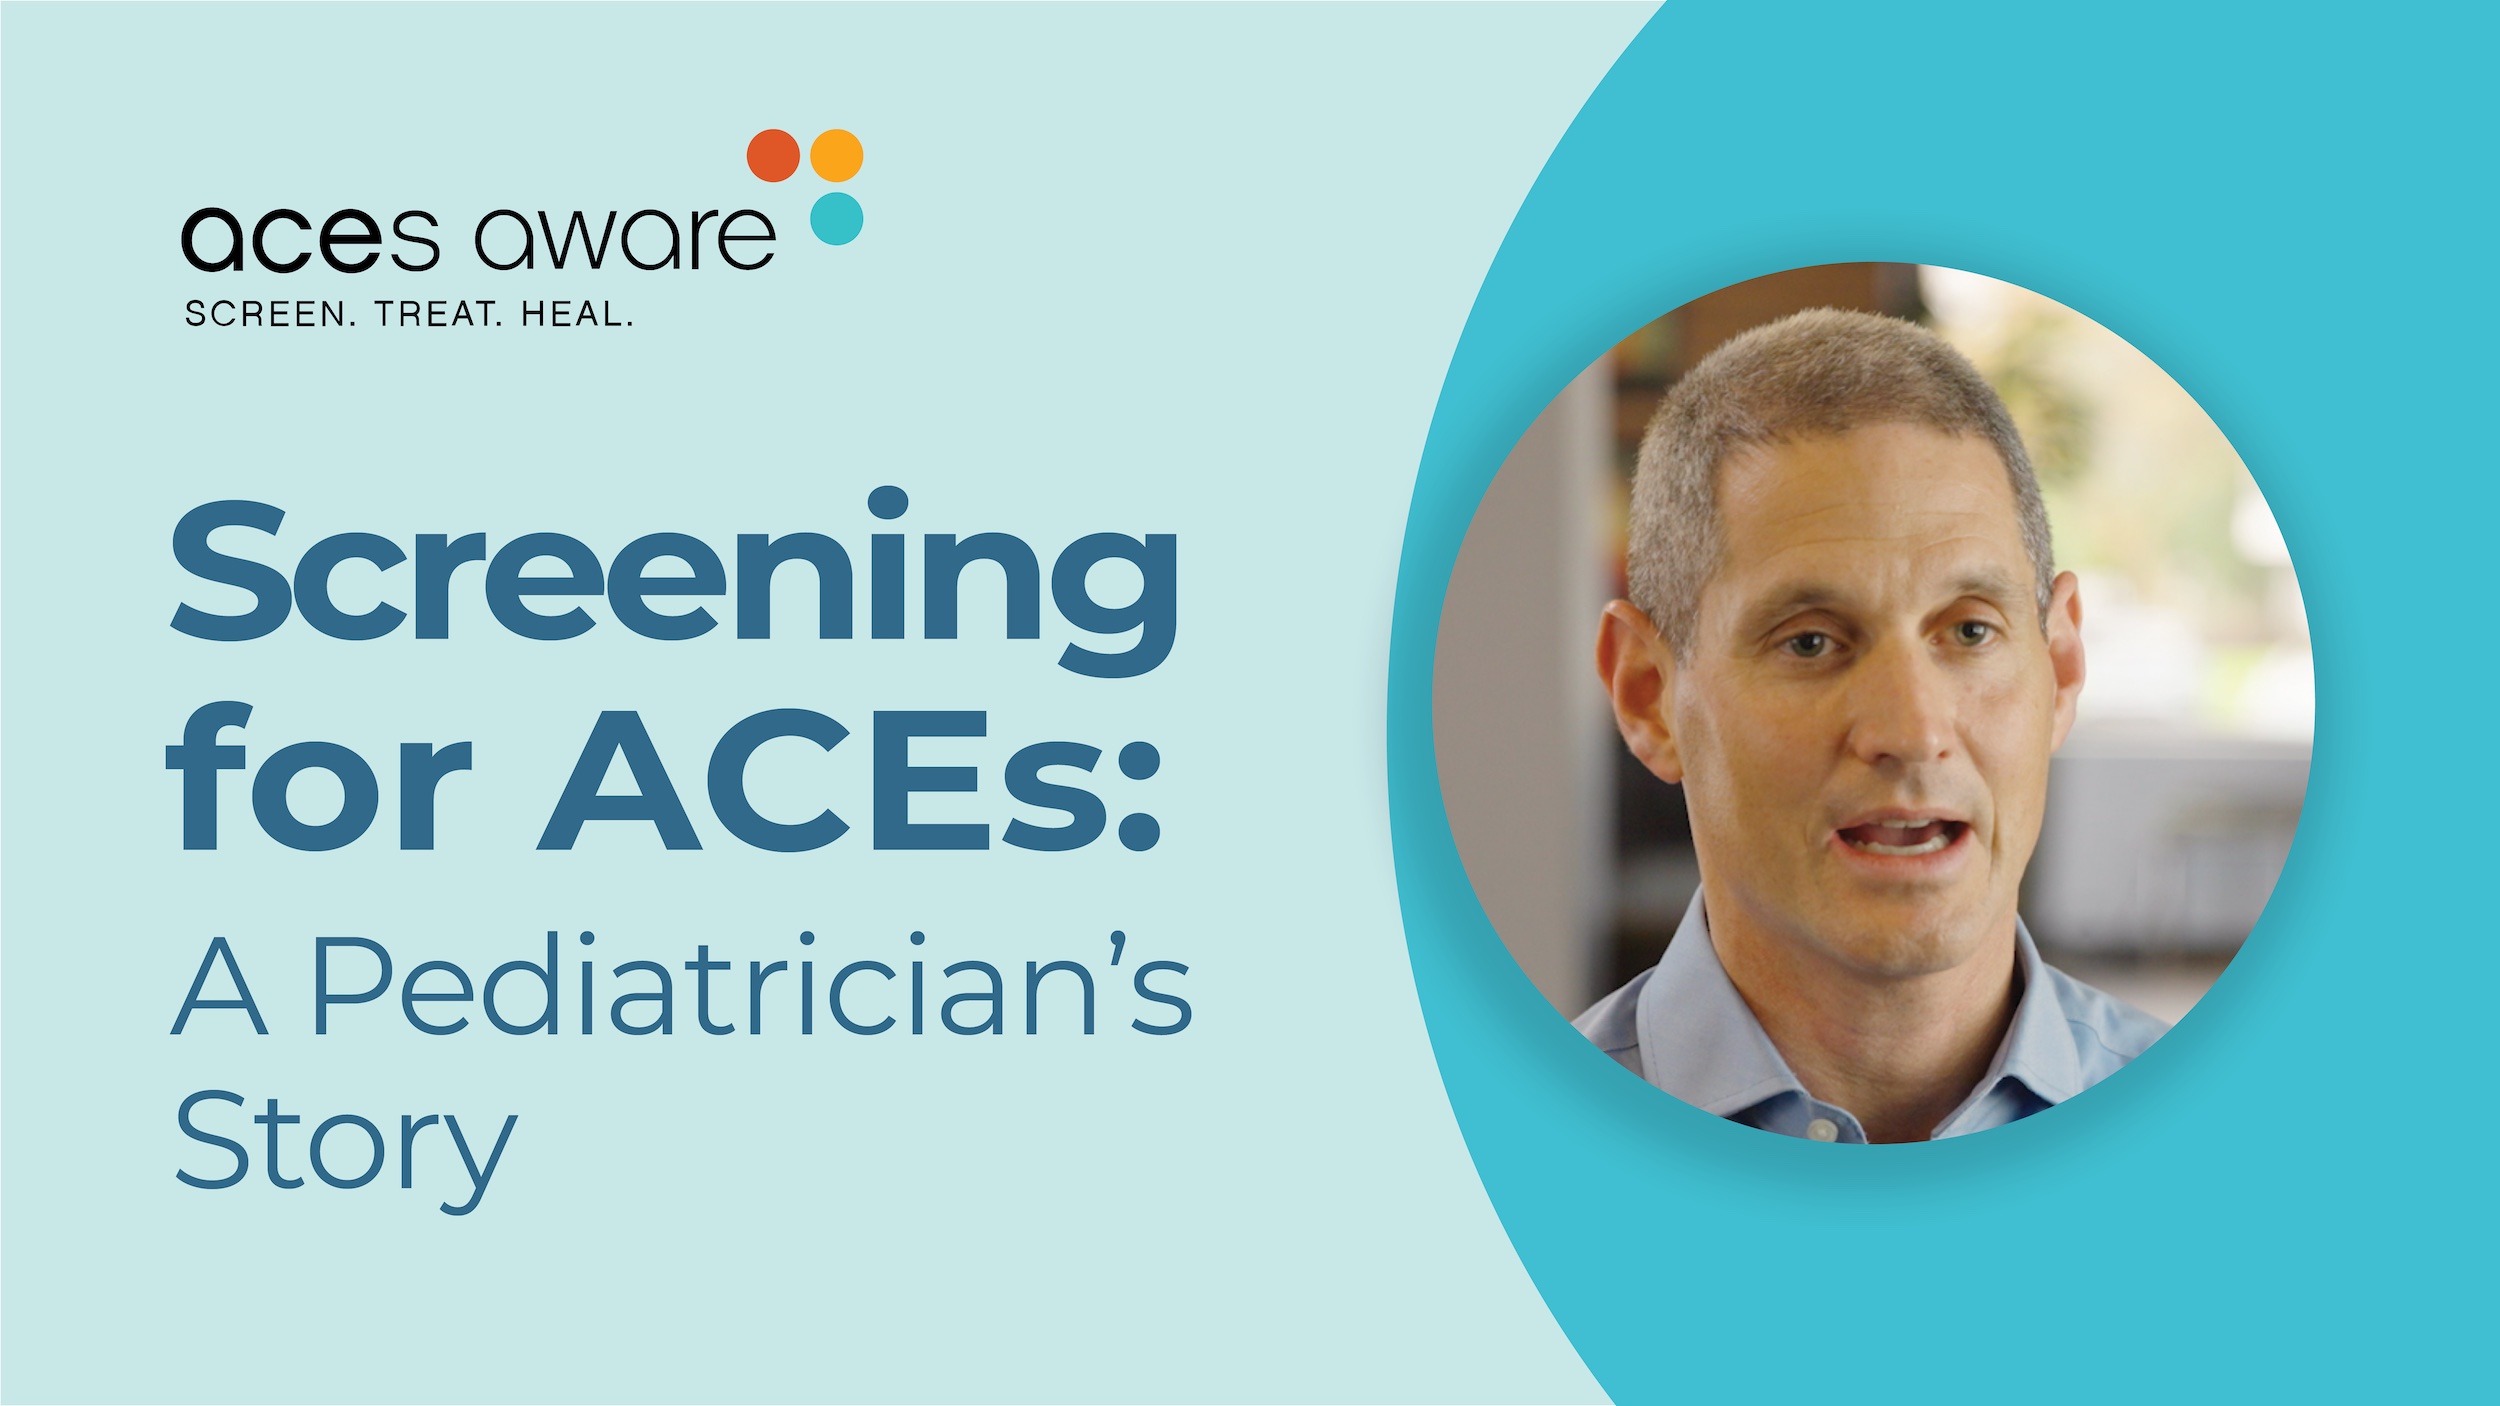 Screening for ACEs: A Pediatrician's Story